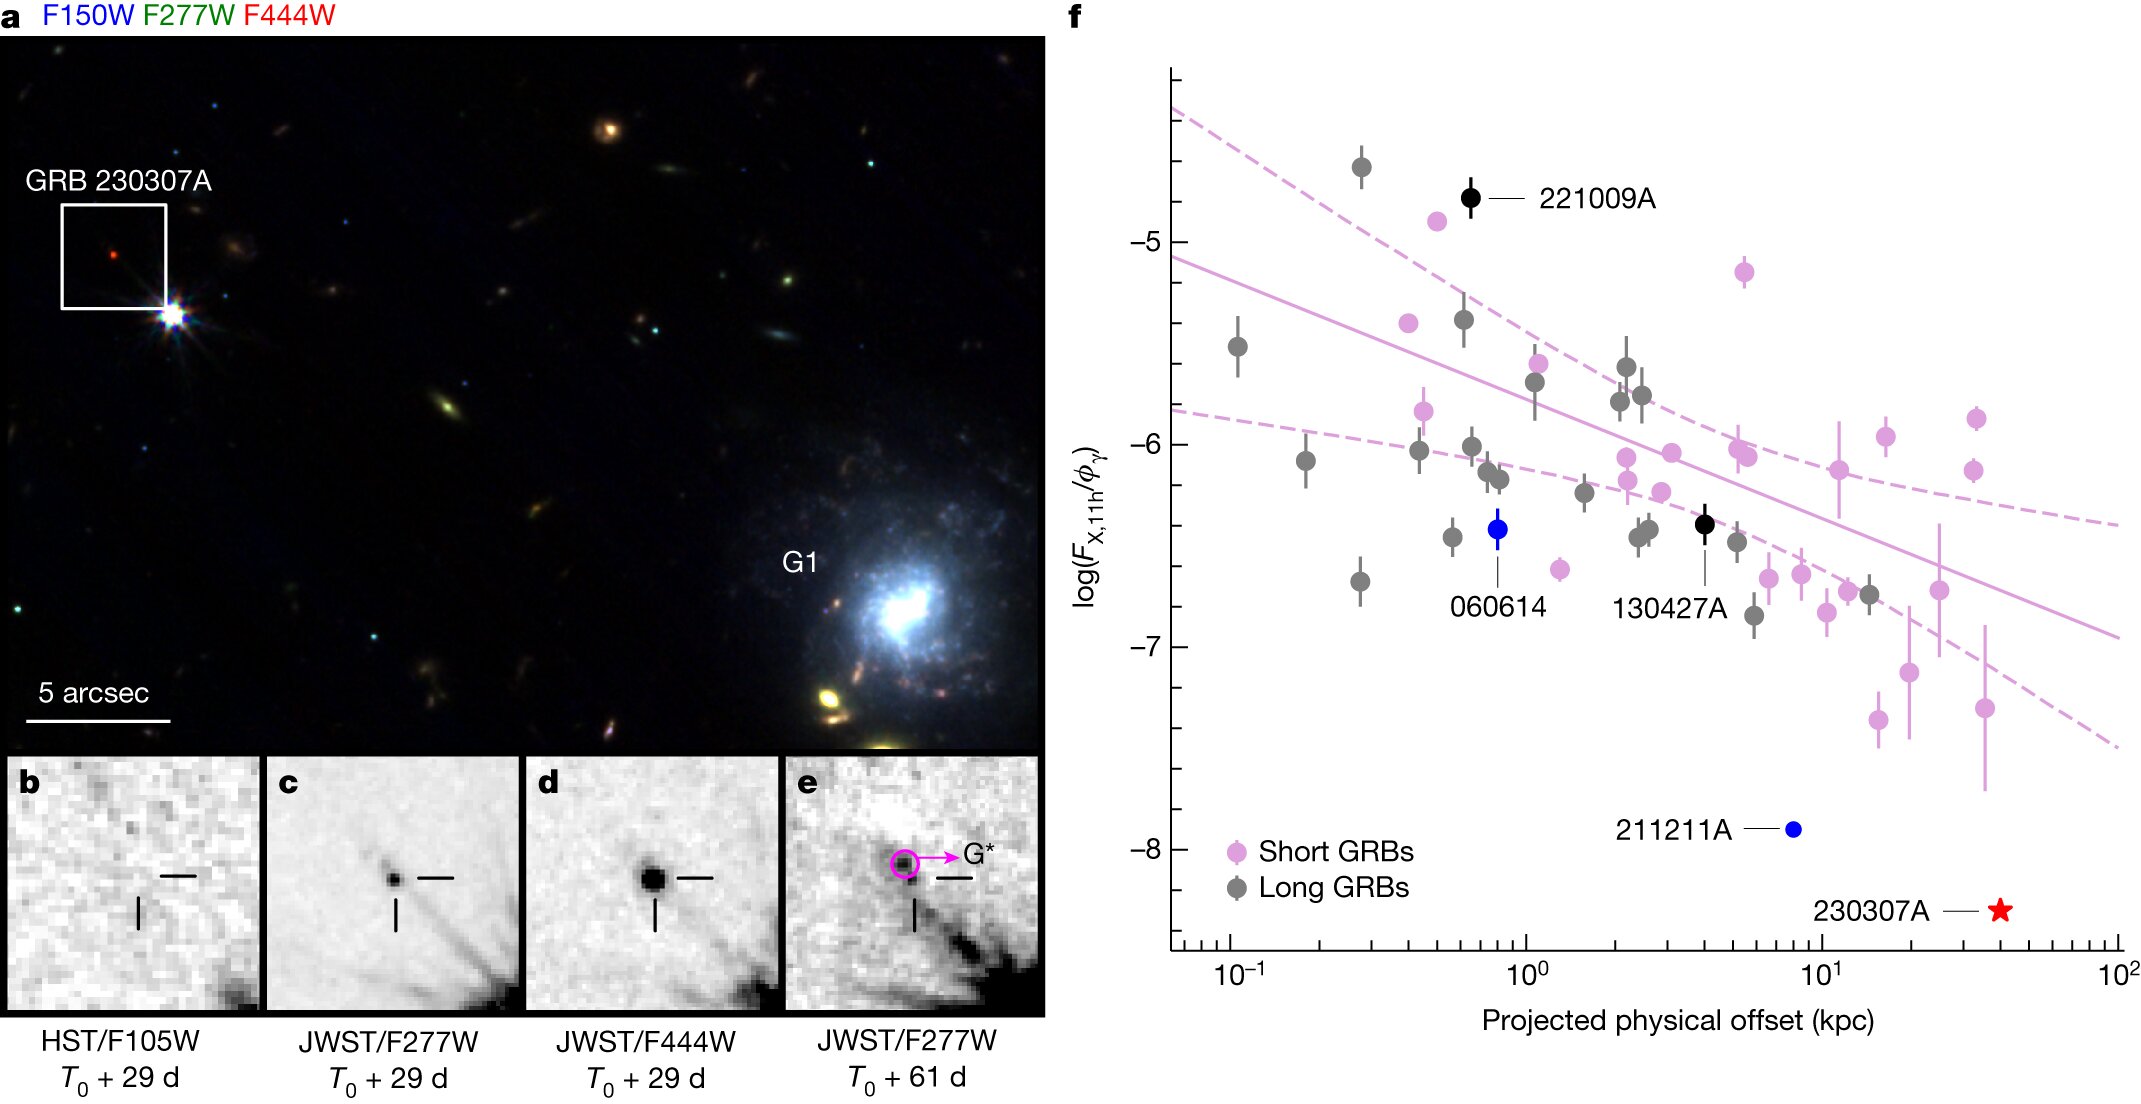 Further study of bright gamma-ray burst GRB 230307A shows it was caused by neutron stars merging